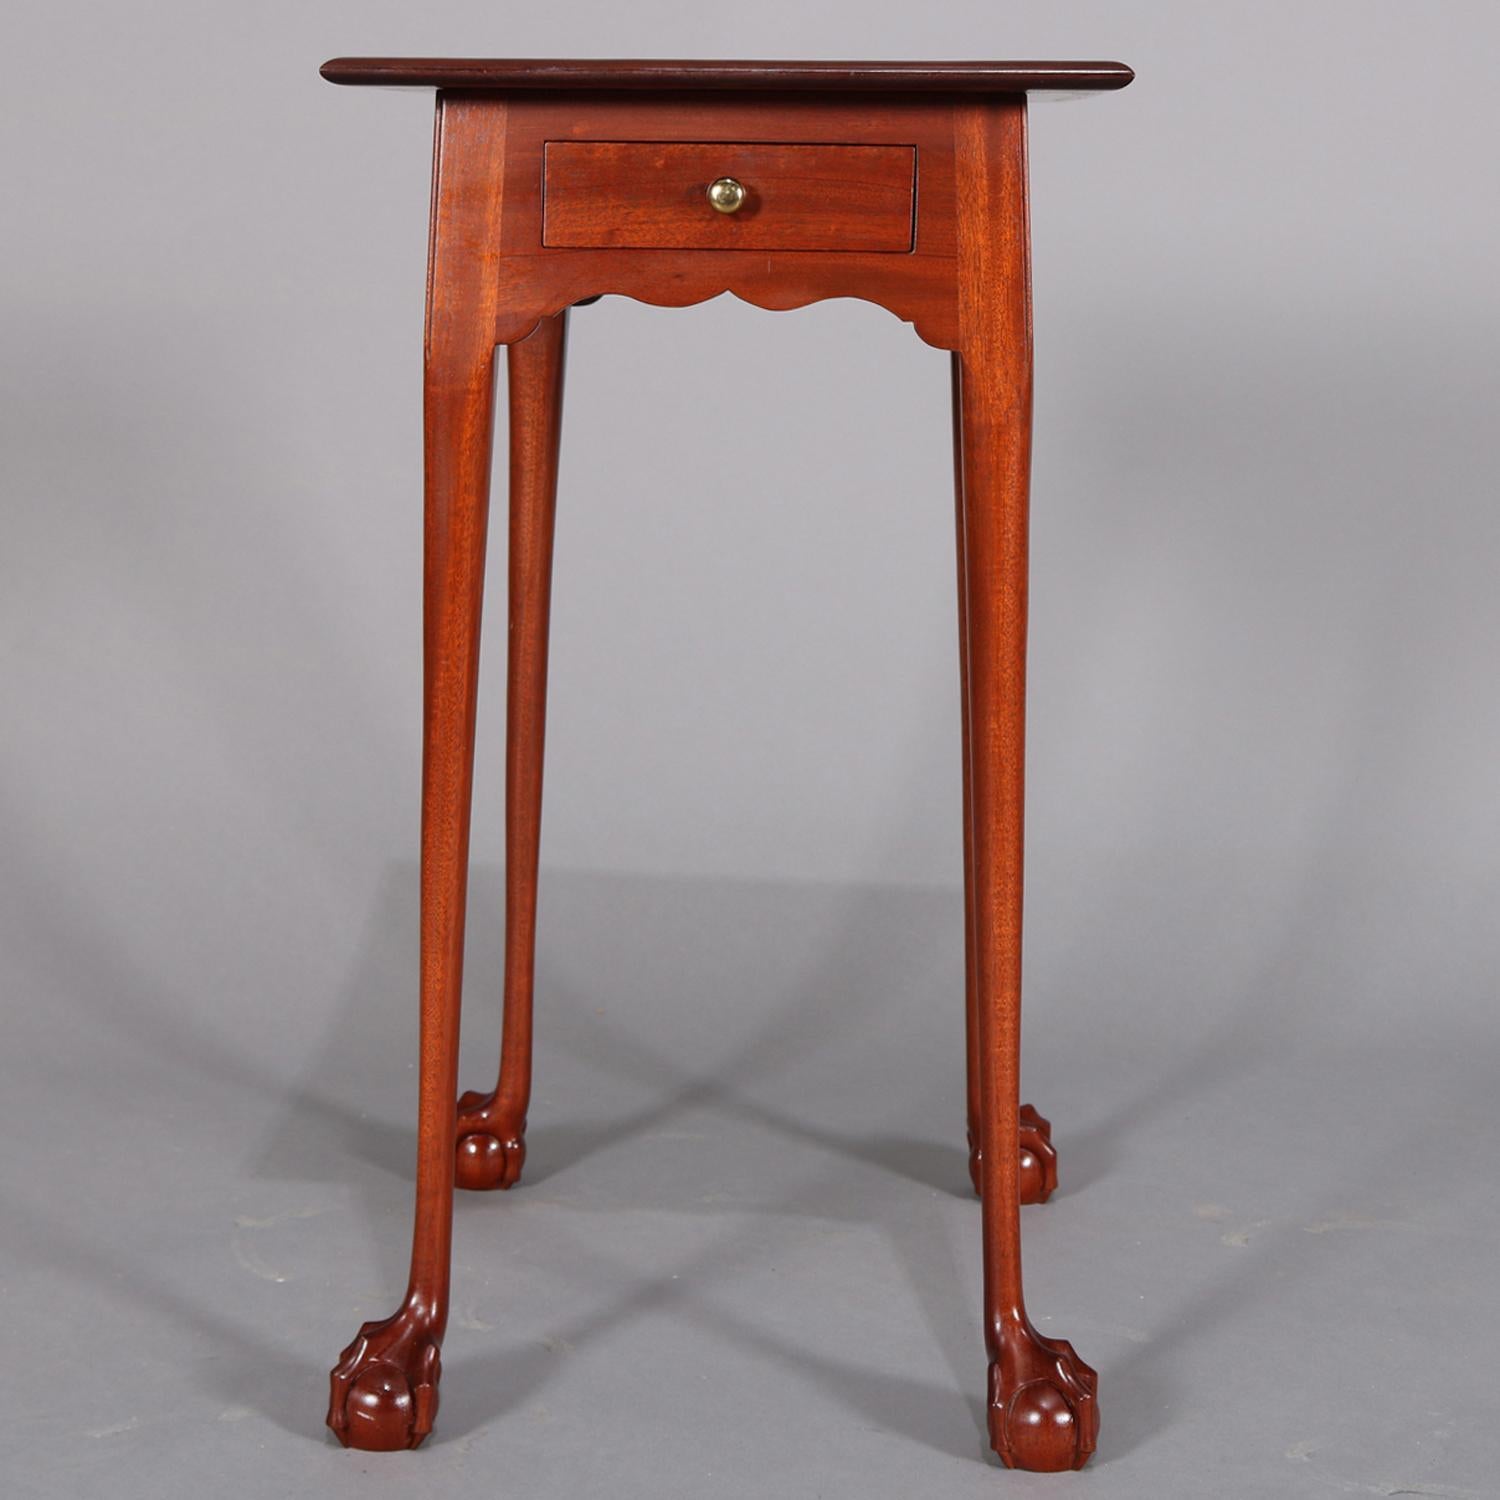 Custom crafted Chippendale school end stand features oversized tabletop over single drawer case with scalloped skirt and seated on cabriole legs with carved claw and ball feet, 20th century.

Measures: 28